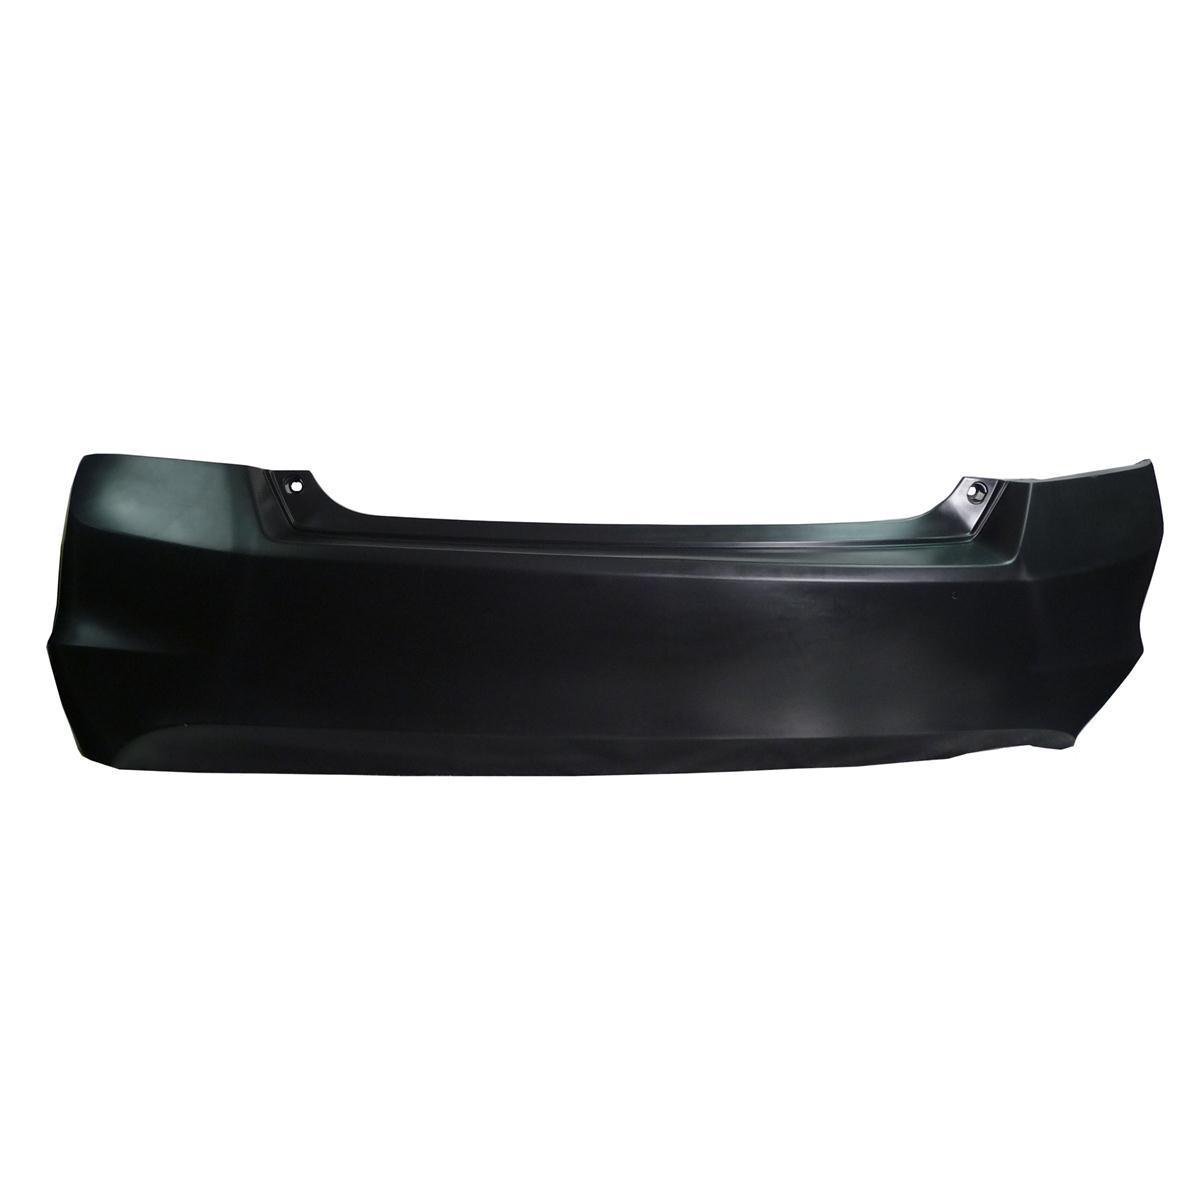 2008-2012 HONDA ACCORD Rear Bumper Cover 4 cyl sedan only Painted to Match